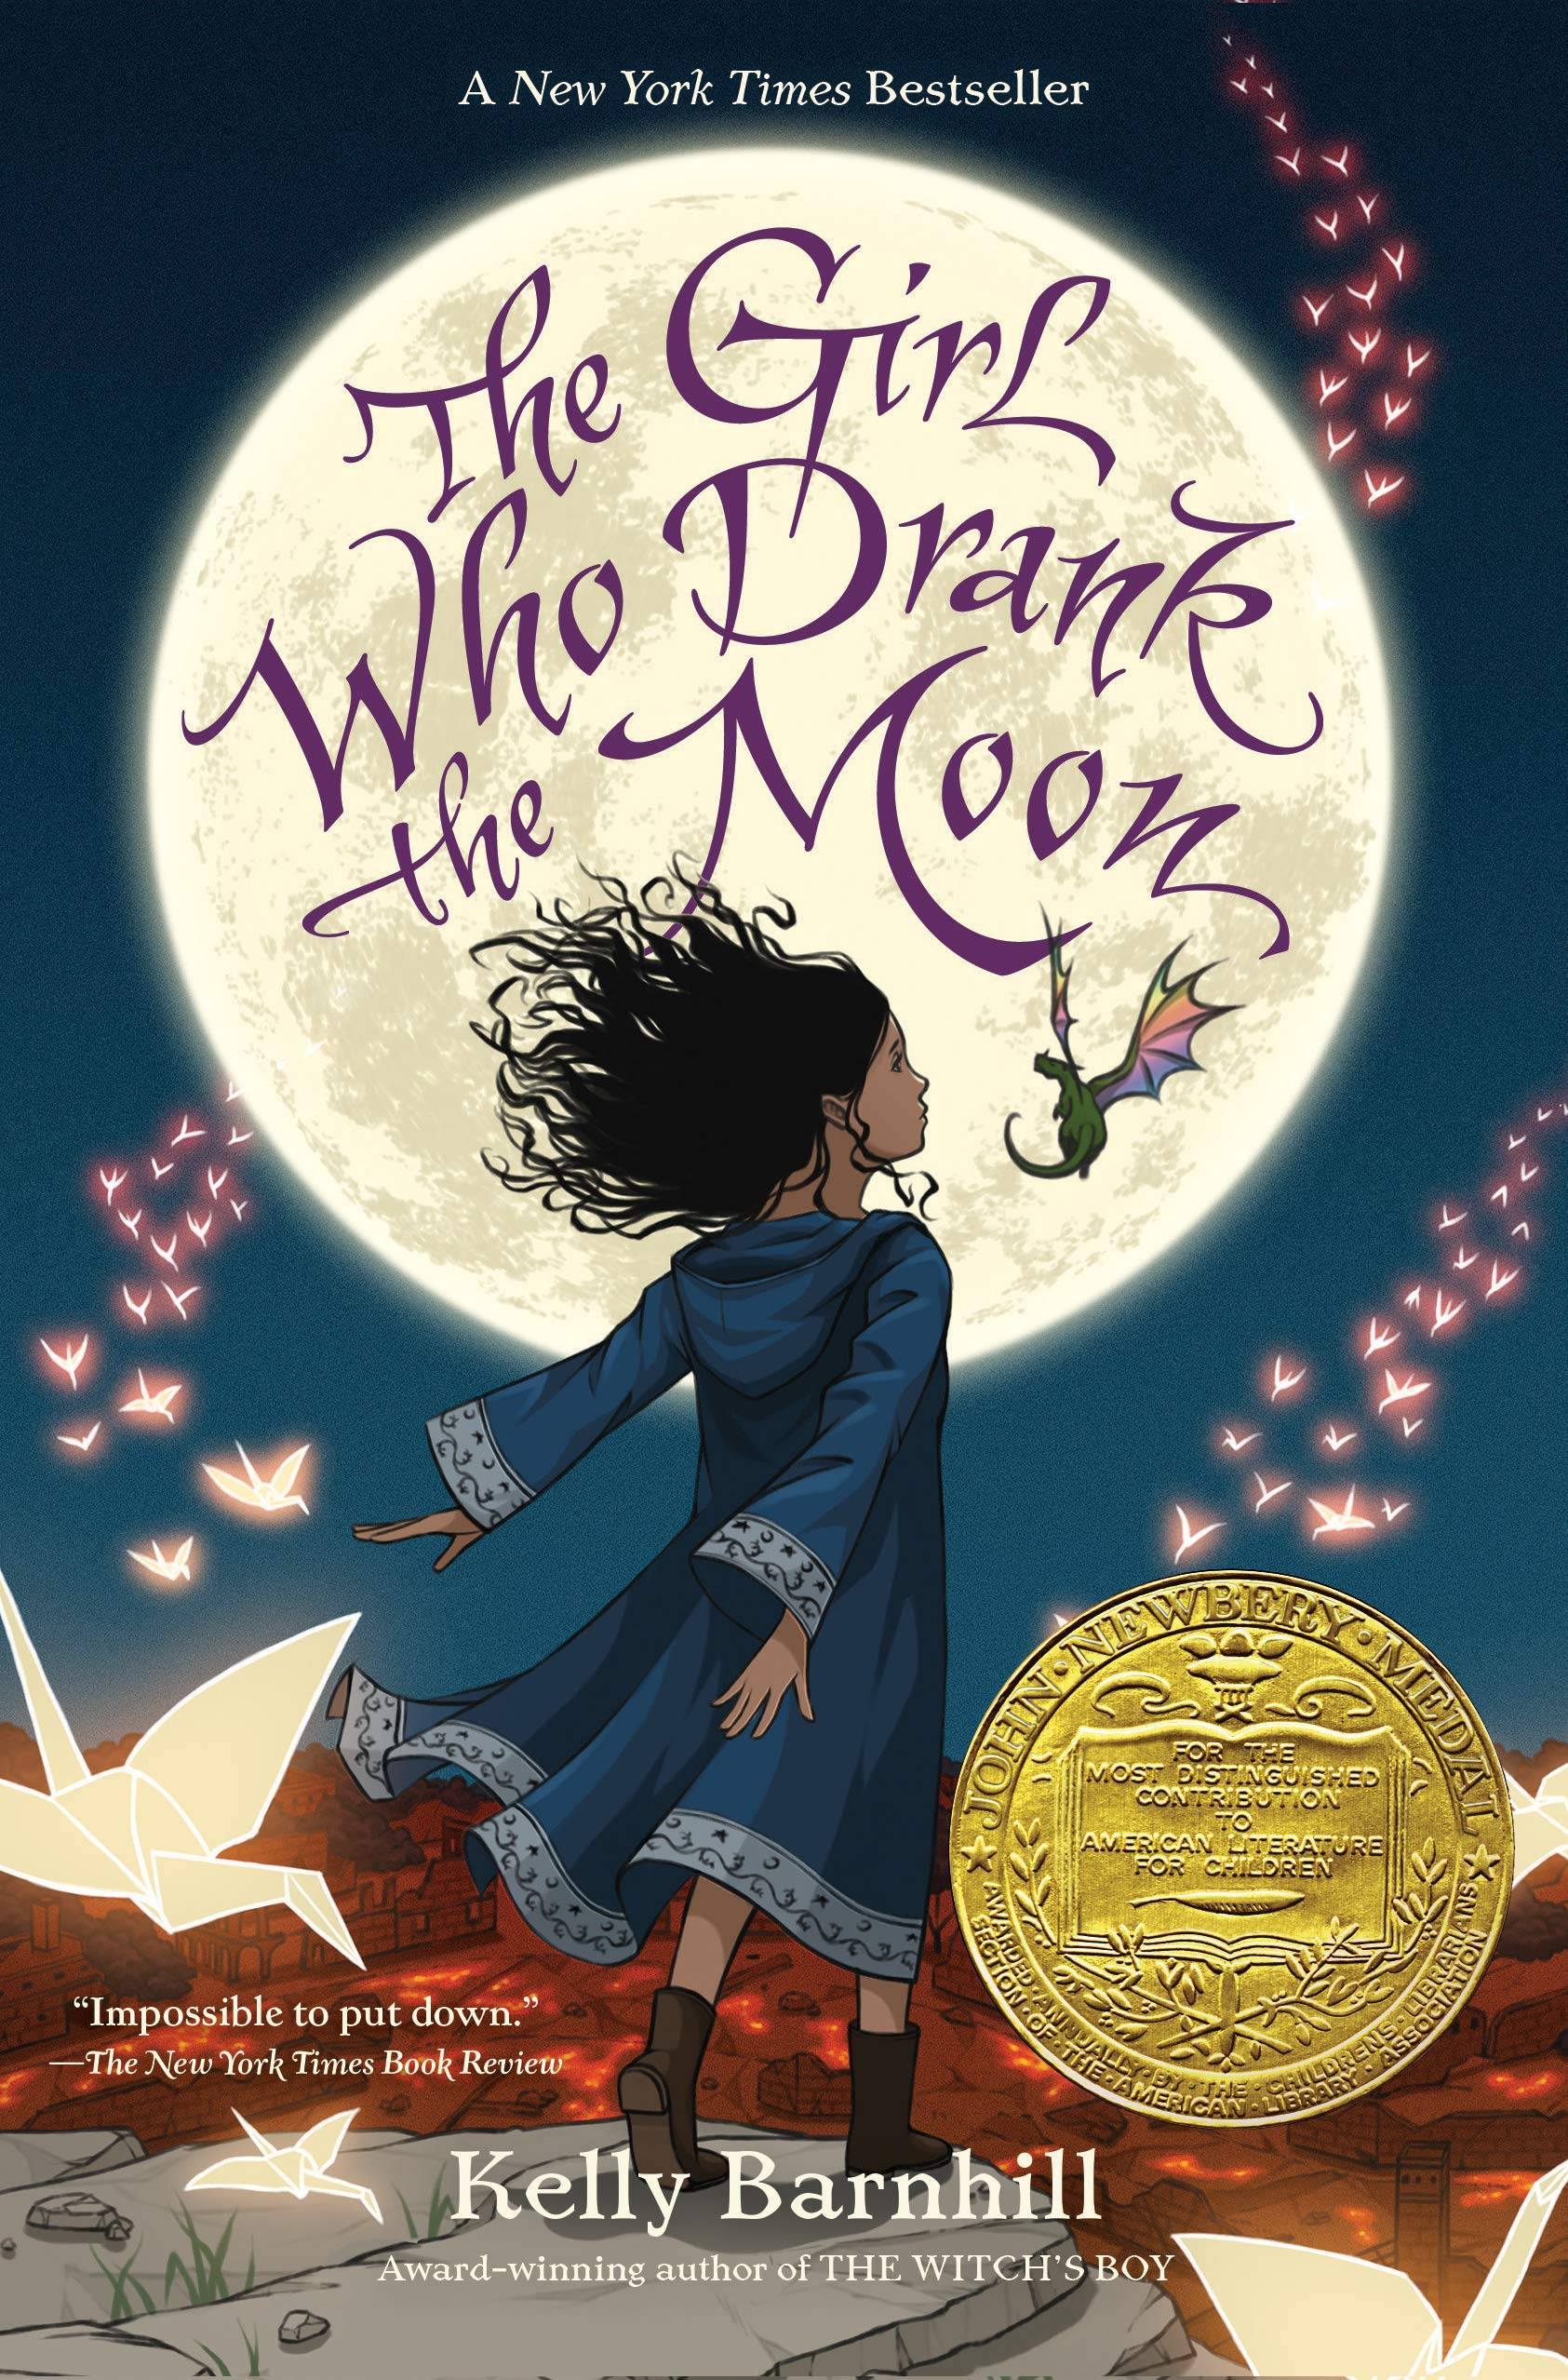 IMG : The Girl Who dranked the moon